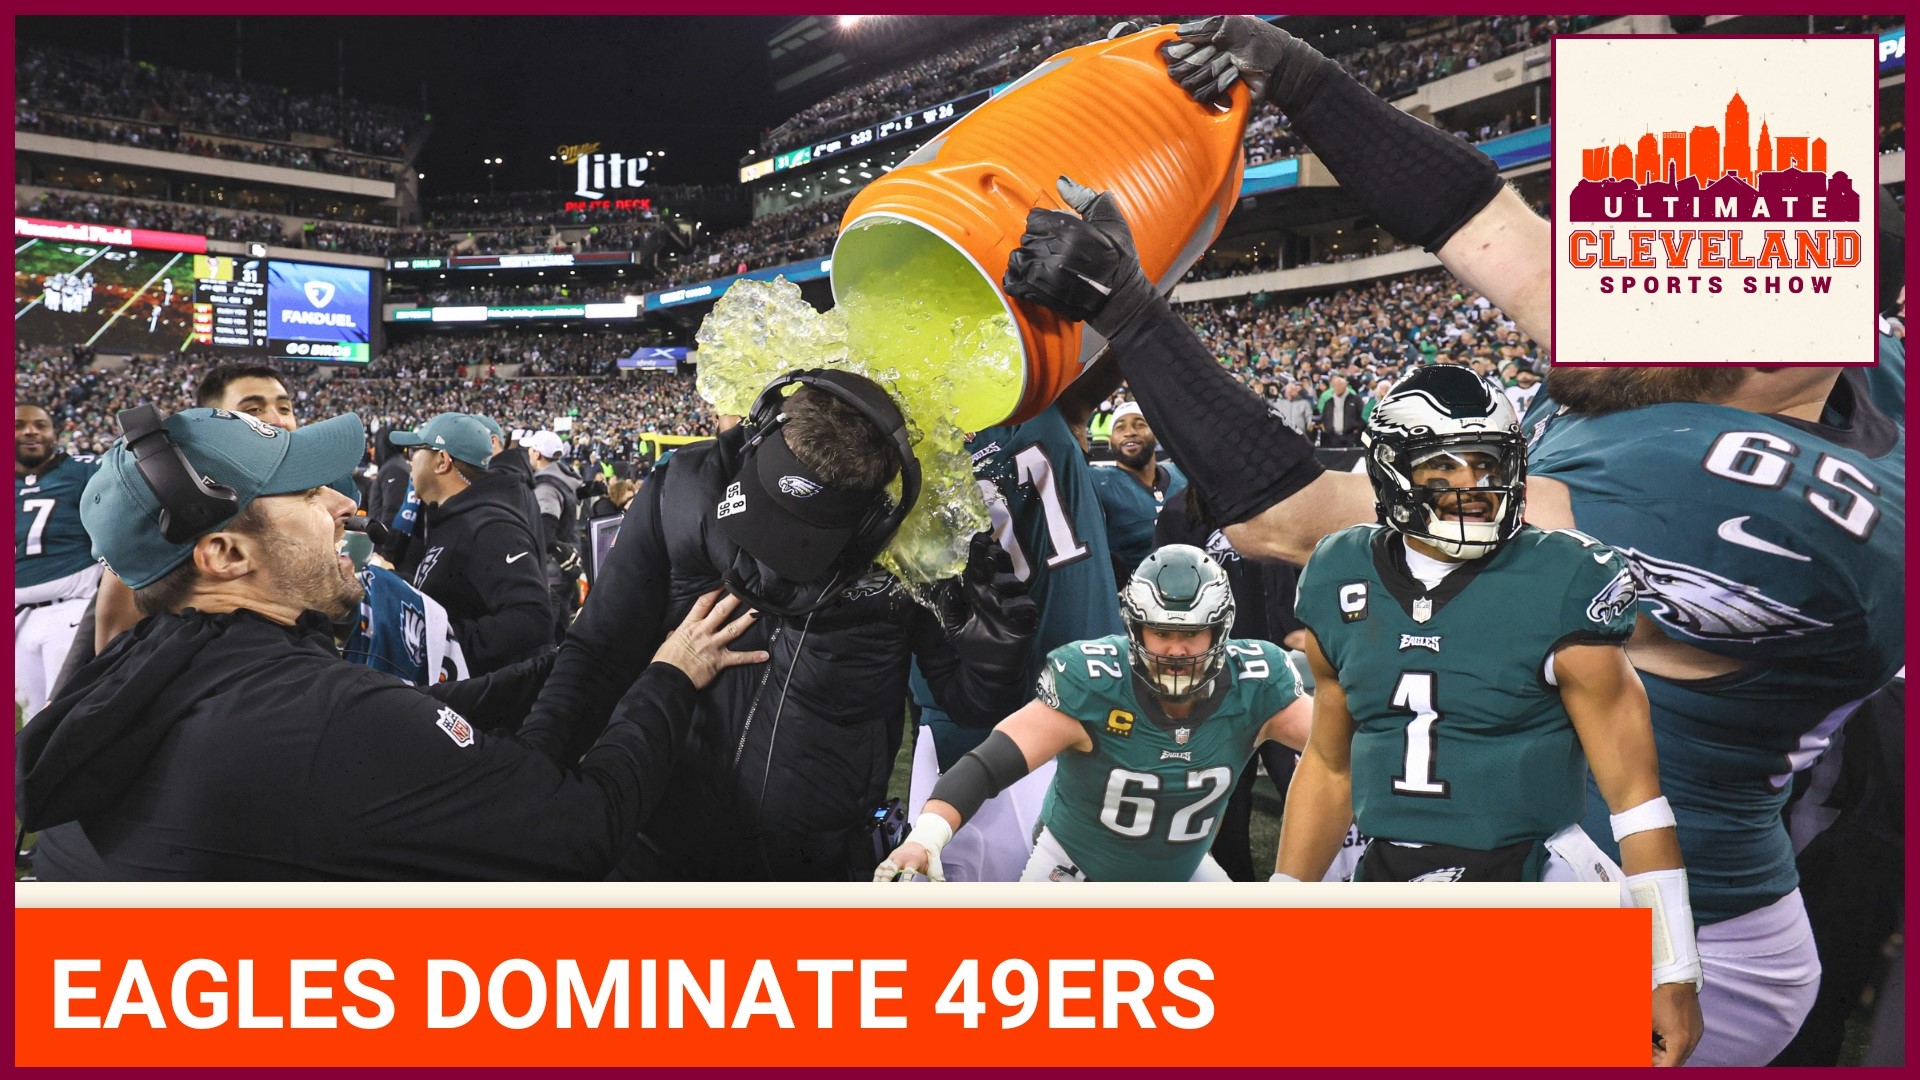 The Eagles send the 49ers packing with a 31-7 victory to reach Super Bowl LVII